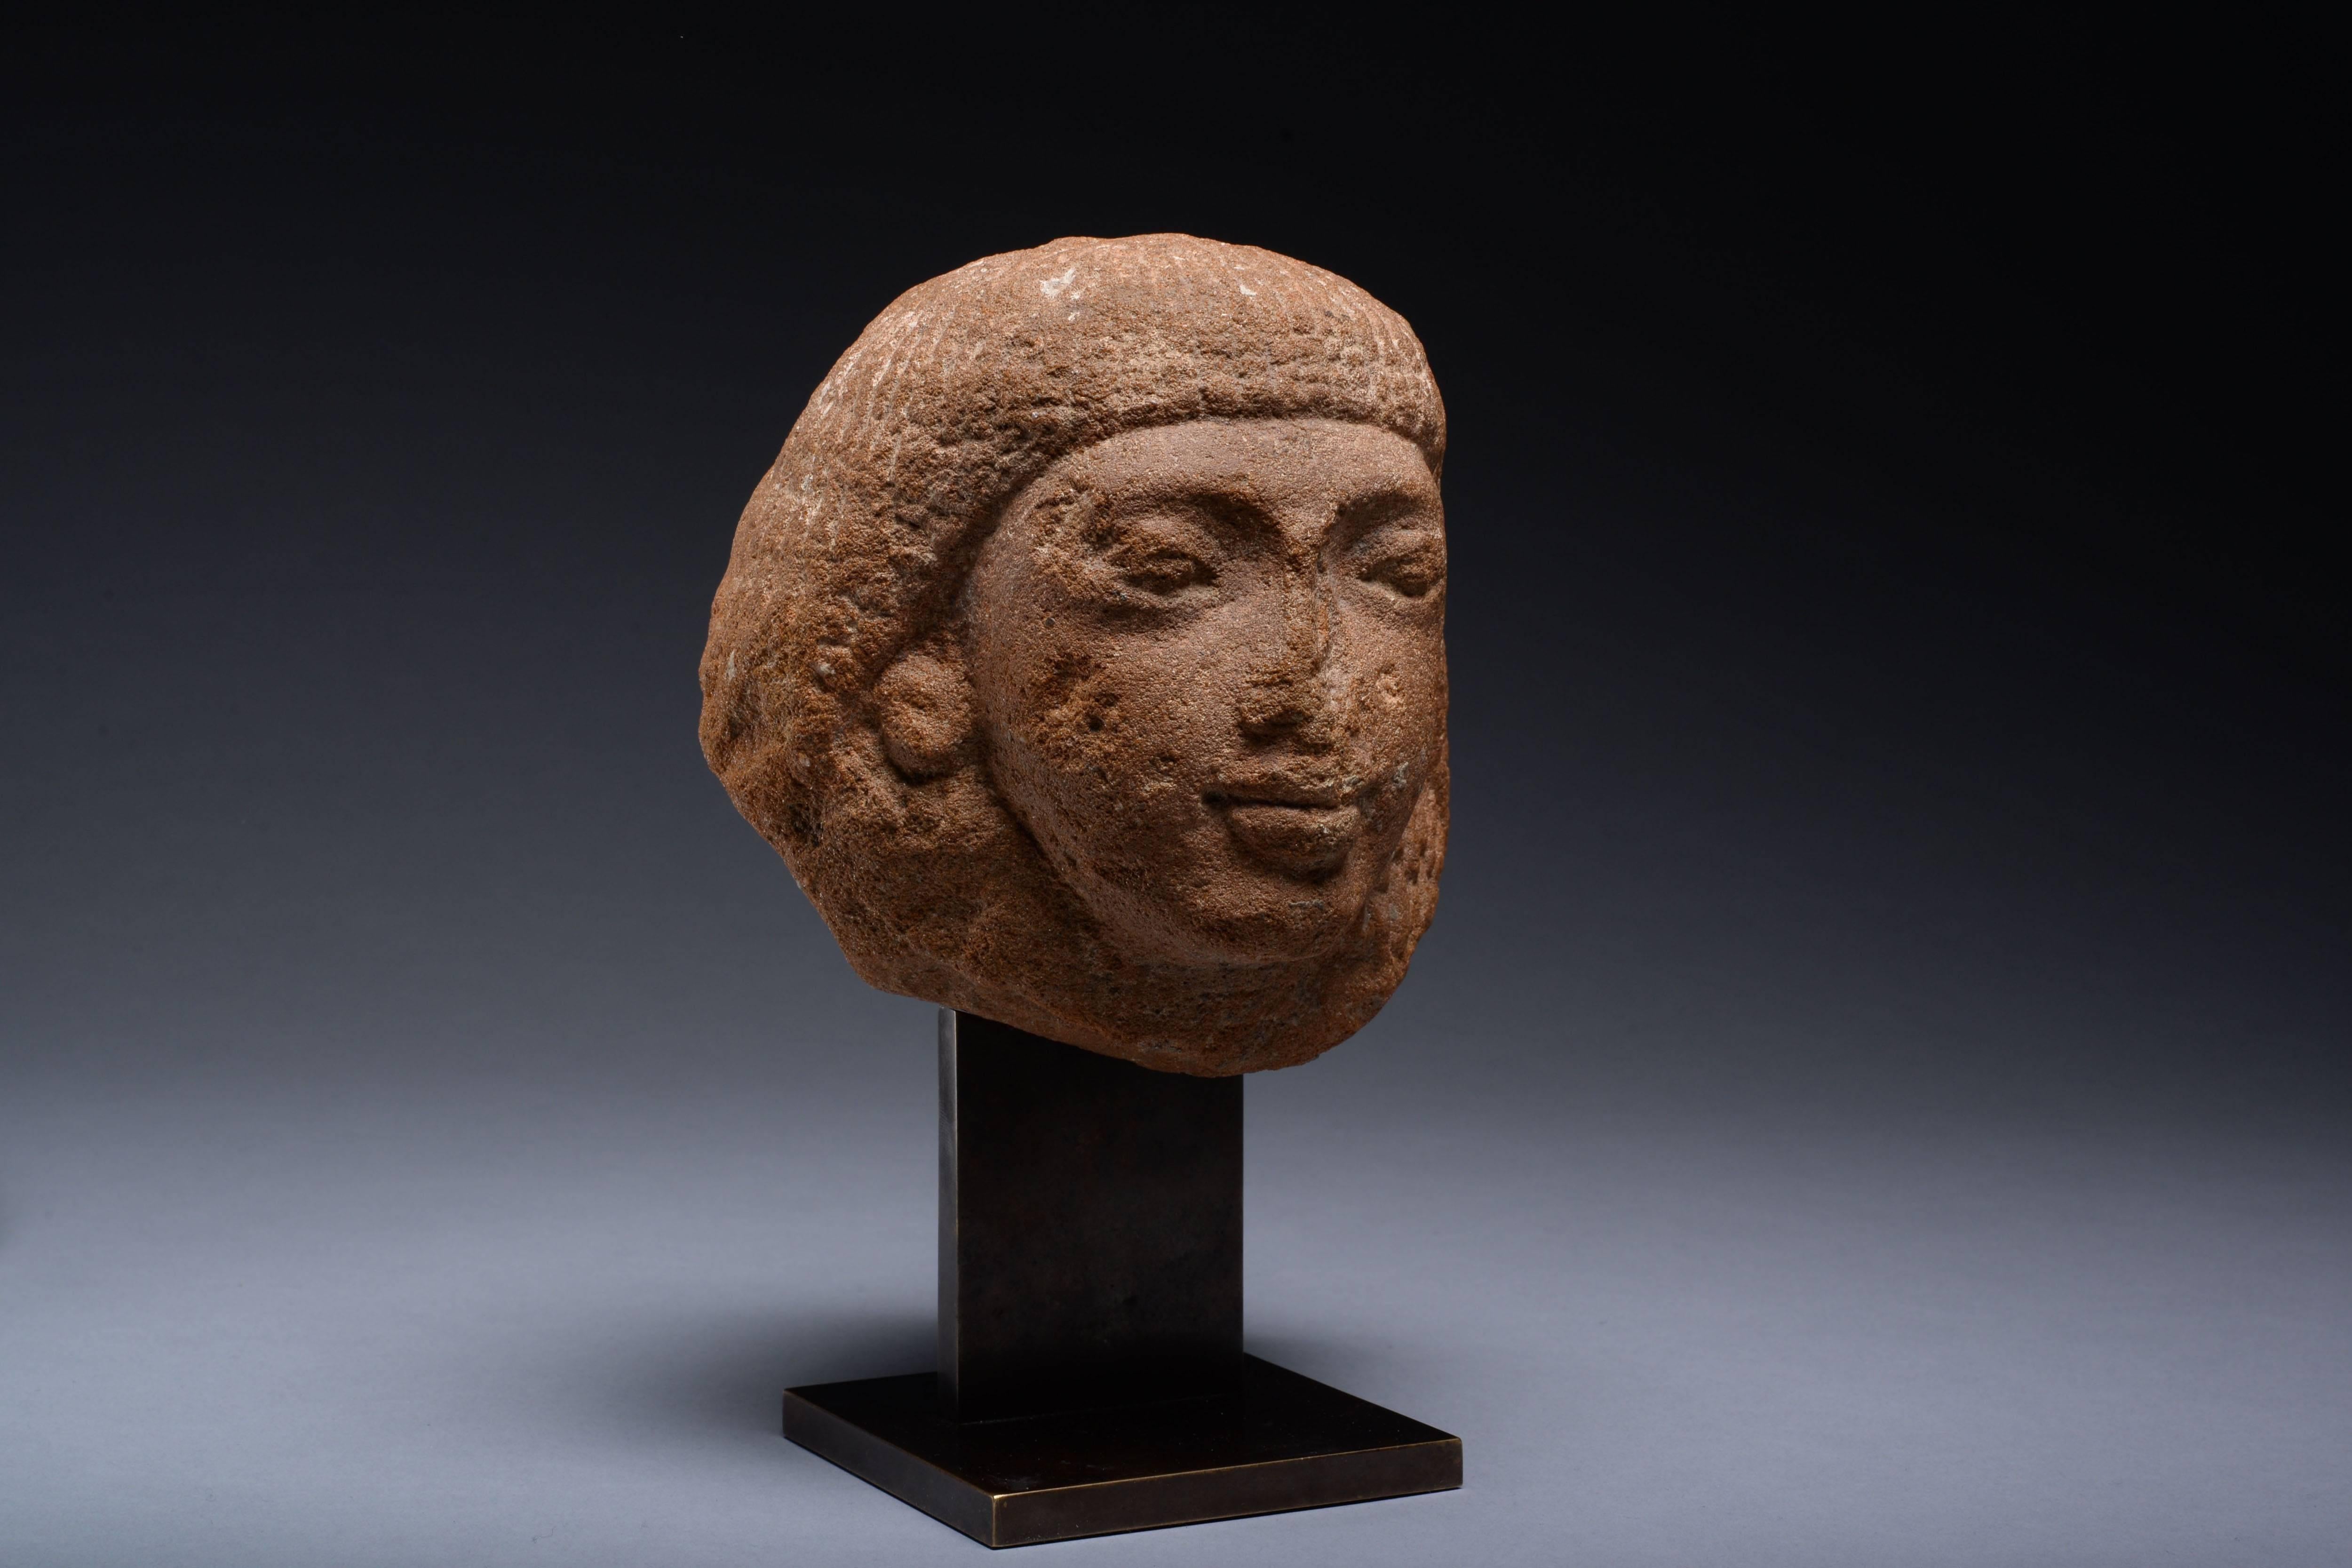 A rare ancient Egyptian quartzite head of an official, dating to the late 18th-early 19th Dynasty, circa 1320-1280 BC.

Carved from a block of quartzite, depicting a man wearing a double wig made from thick strands of wavy locks, the earlobes